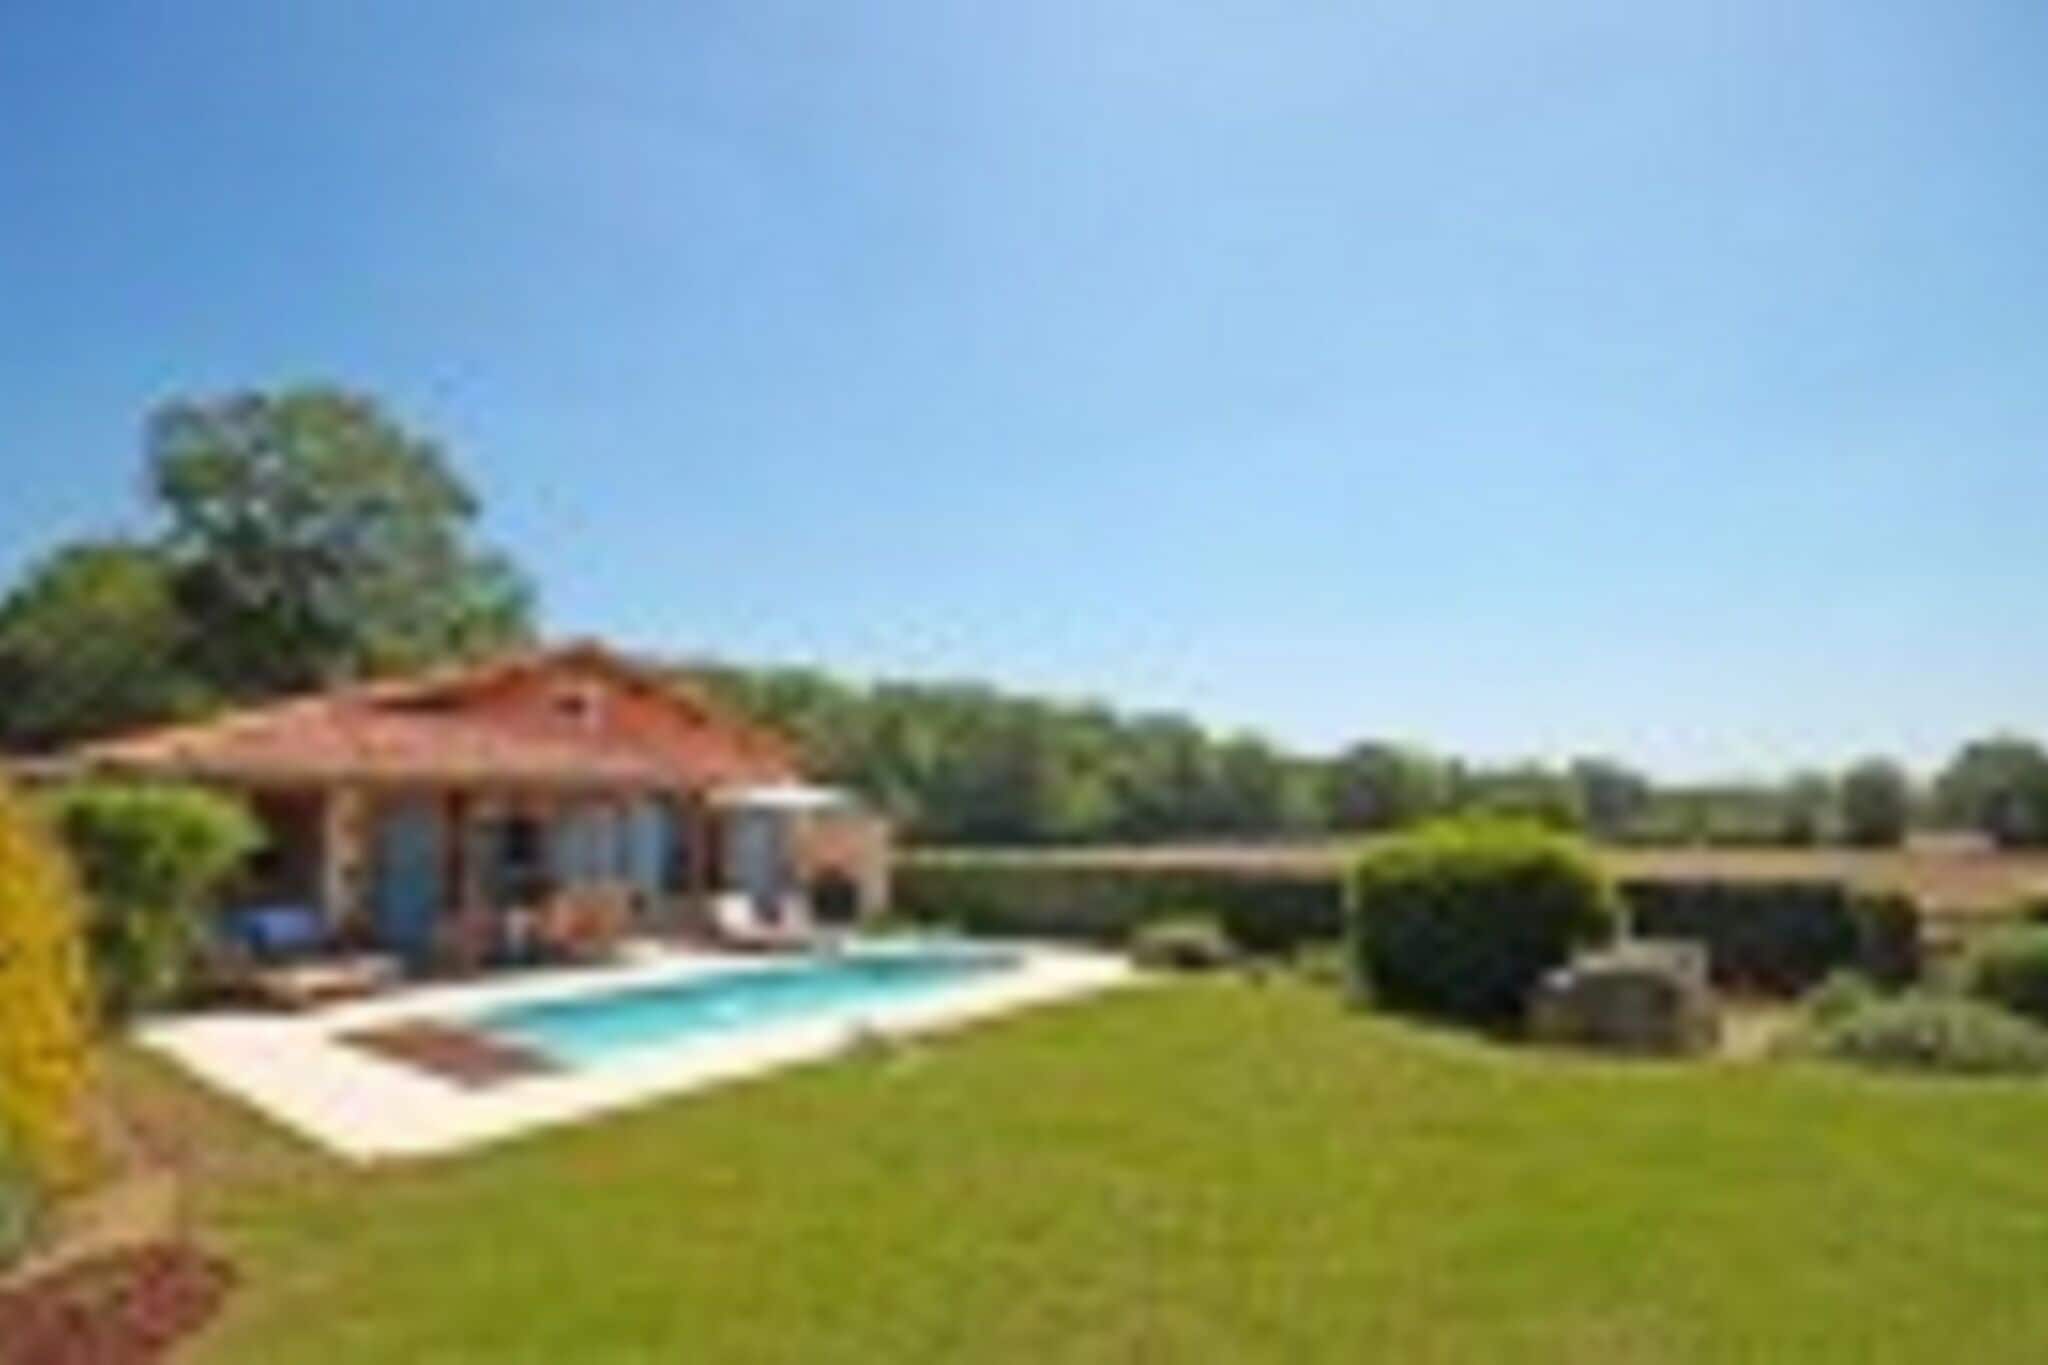 Modern villa with private pool in the beautiful Loire